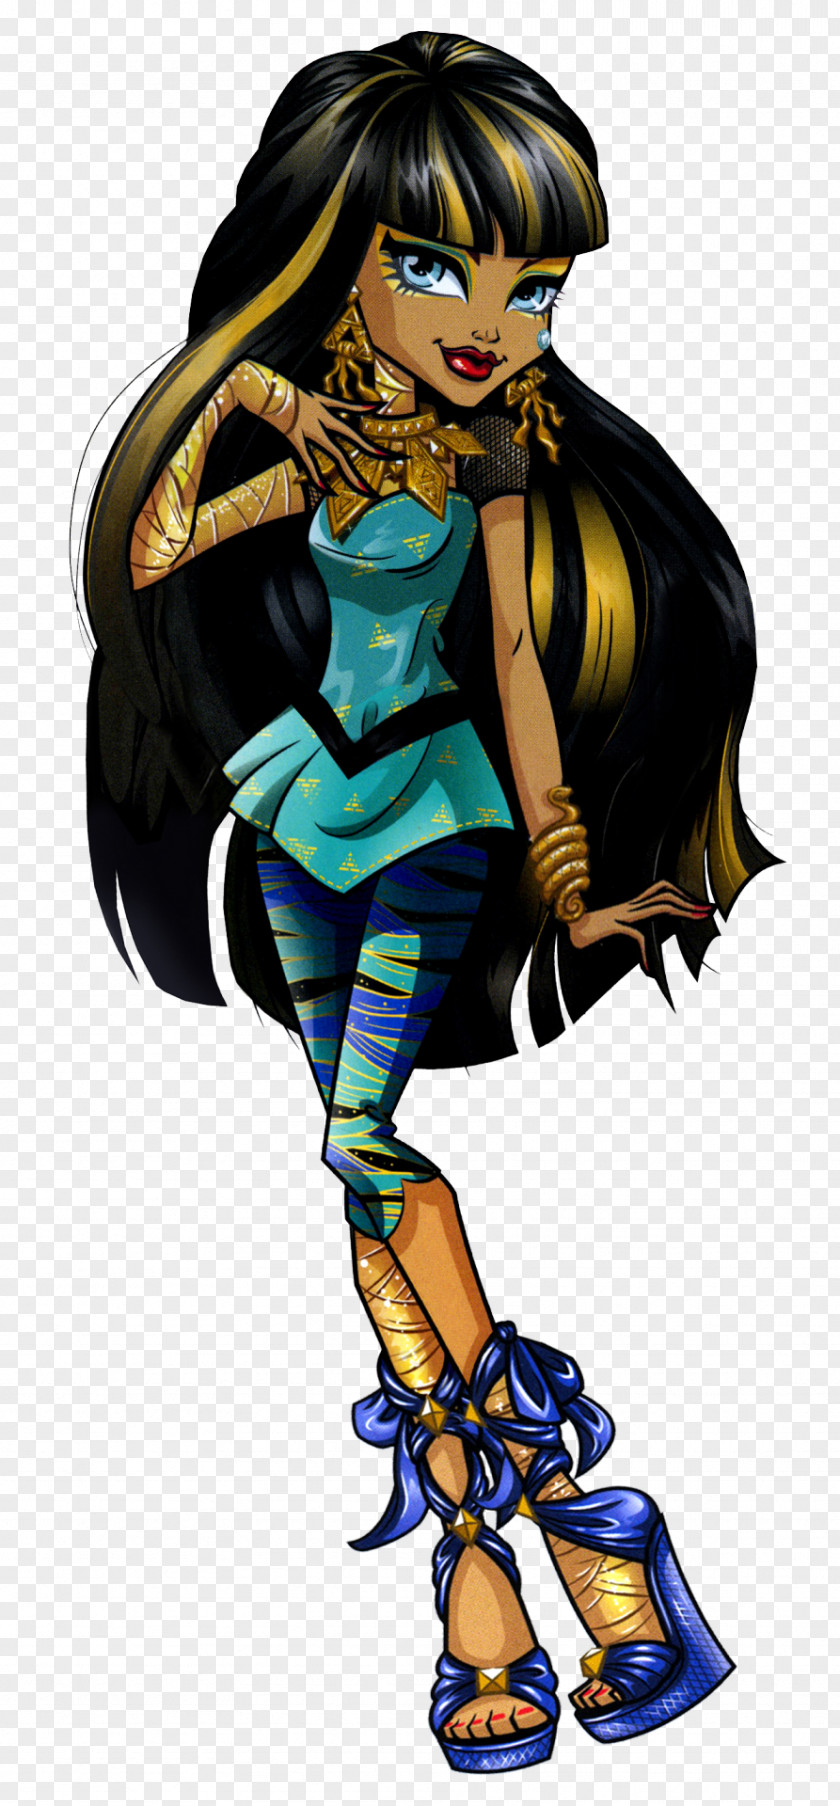 Doll Cleo DeNile Monster High De Nile Clawdeen Wolf Frankie Stein PNG